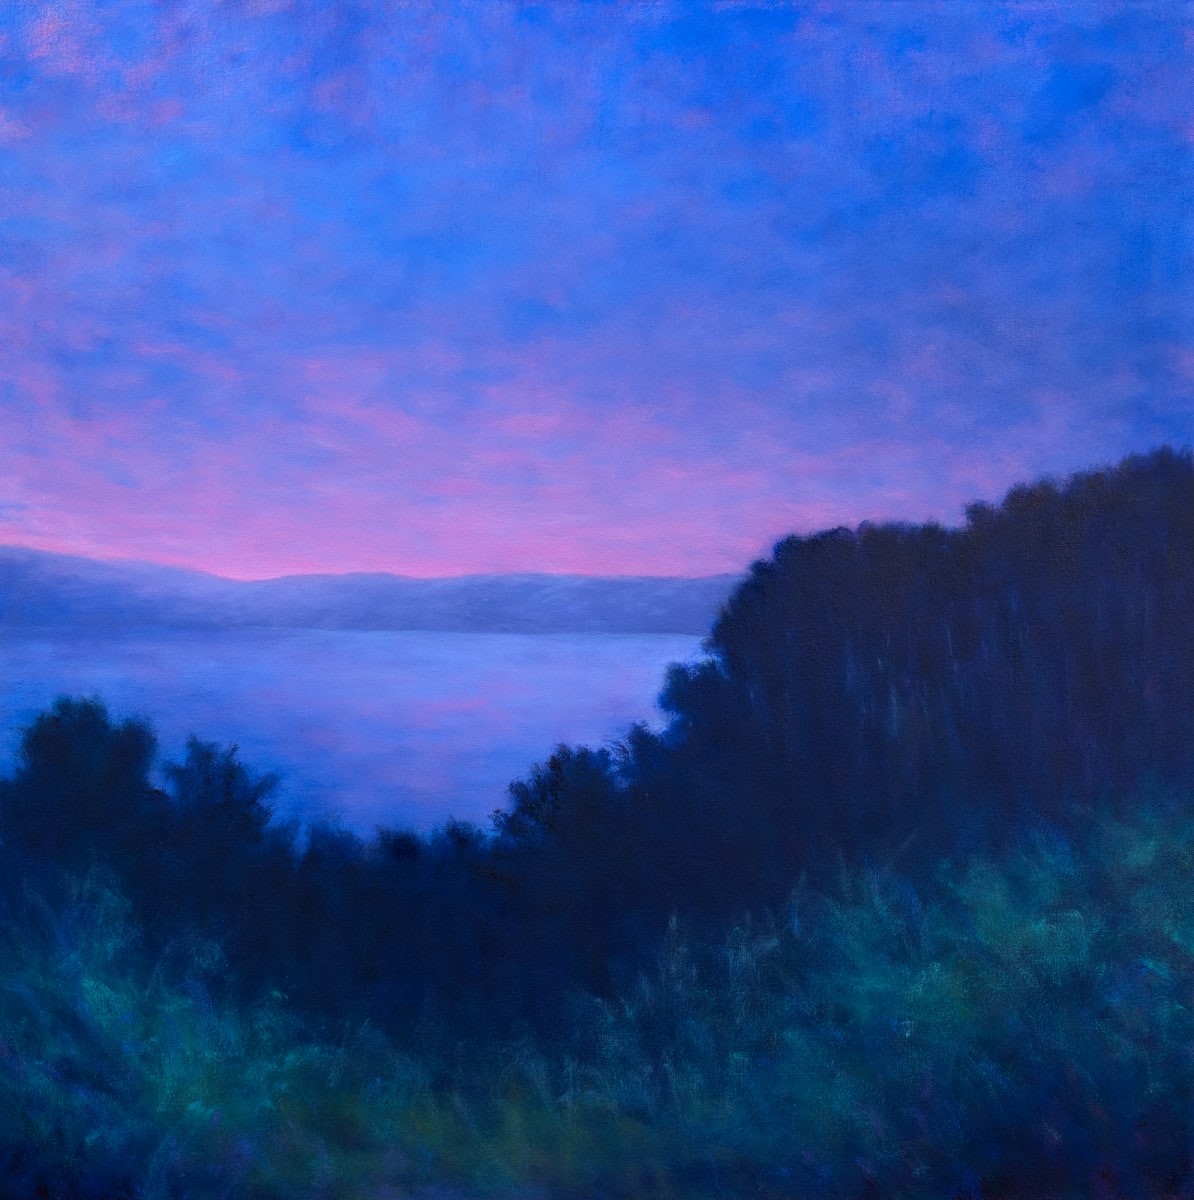 Dusk Falls Over the Bay by Victoria Veedell 